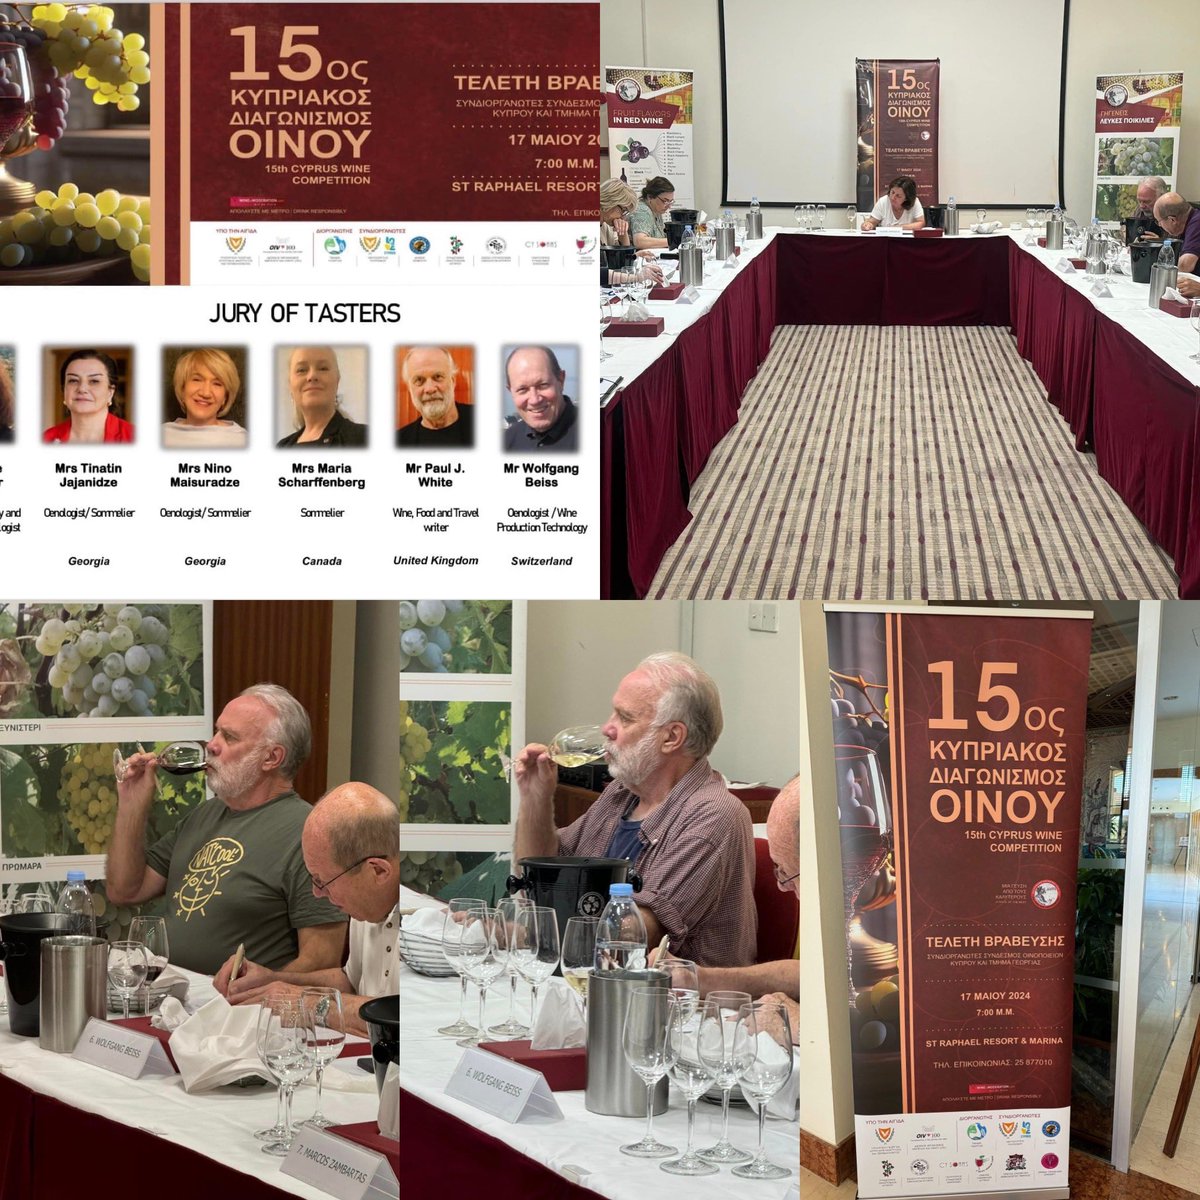 A pleasure to share these photos of @CircleofWine member Paul White judging at the 15th Cyprus Wine Competition, as a direct result of an invitation received during the @CircleofWine press trip to Cyprus, so kindly organised by @michalisg and @visitcyprus .